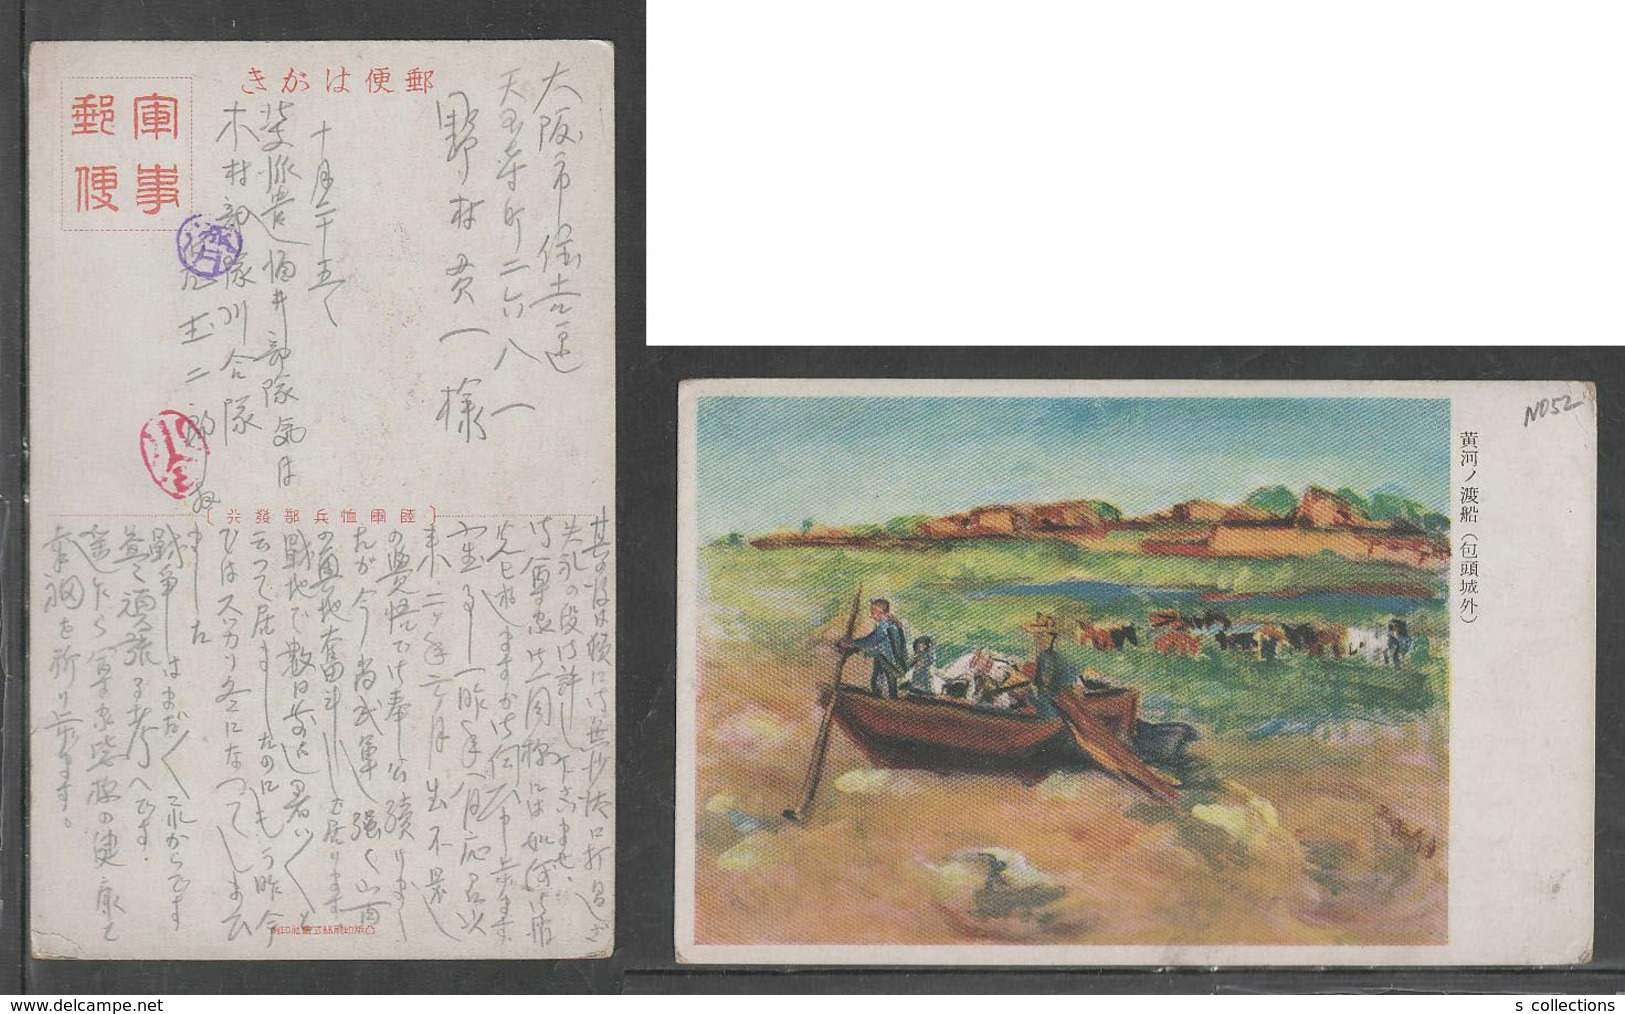 JAPAN WWII Military Yellow River Picture Postcard NORTH CHINA WW2 MANCHURIA CHINE MANDCHOUKOUO JAPON GIAPPONE - 1941-45 Chine Du Nord